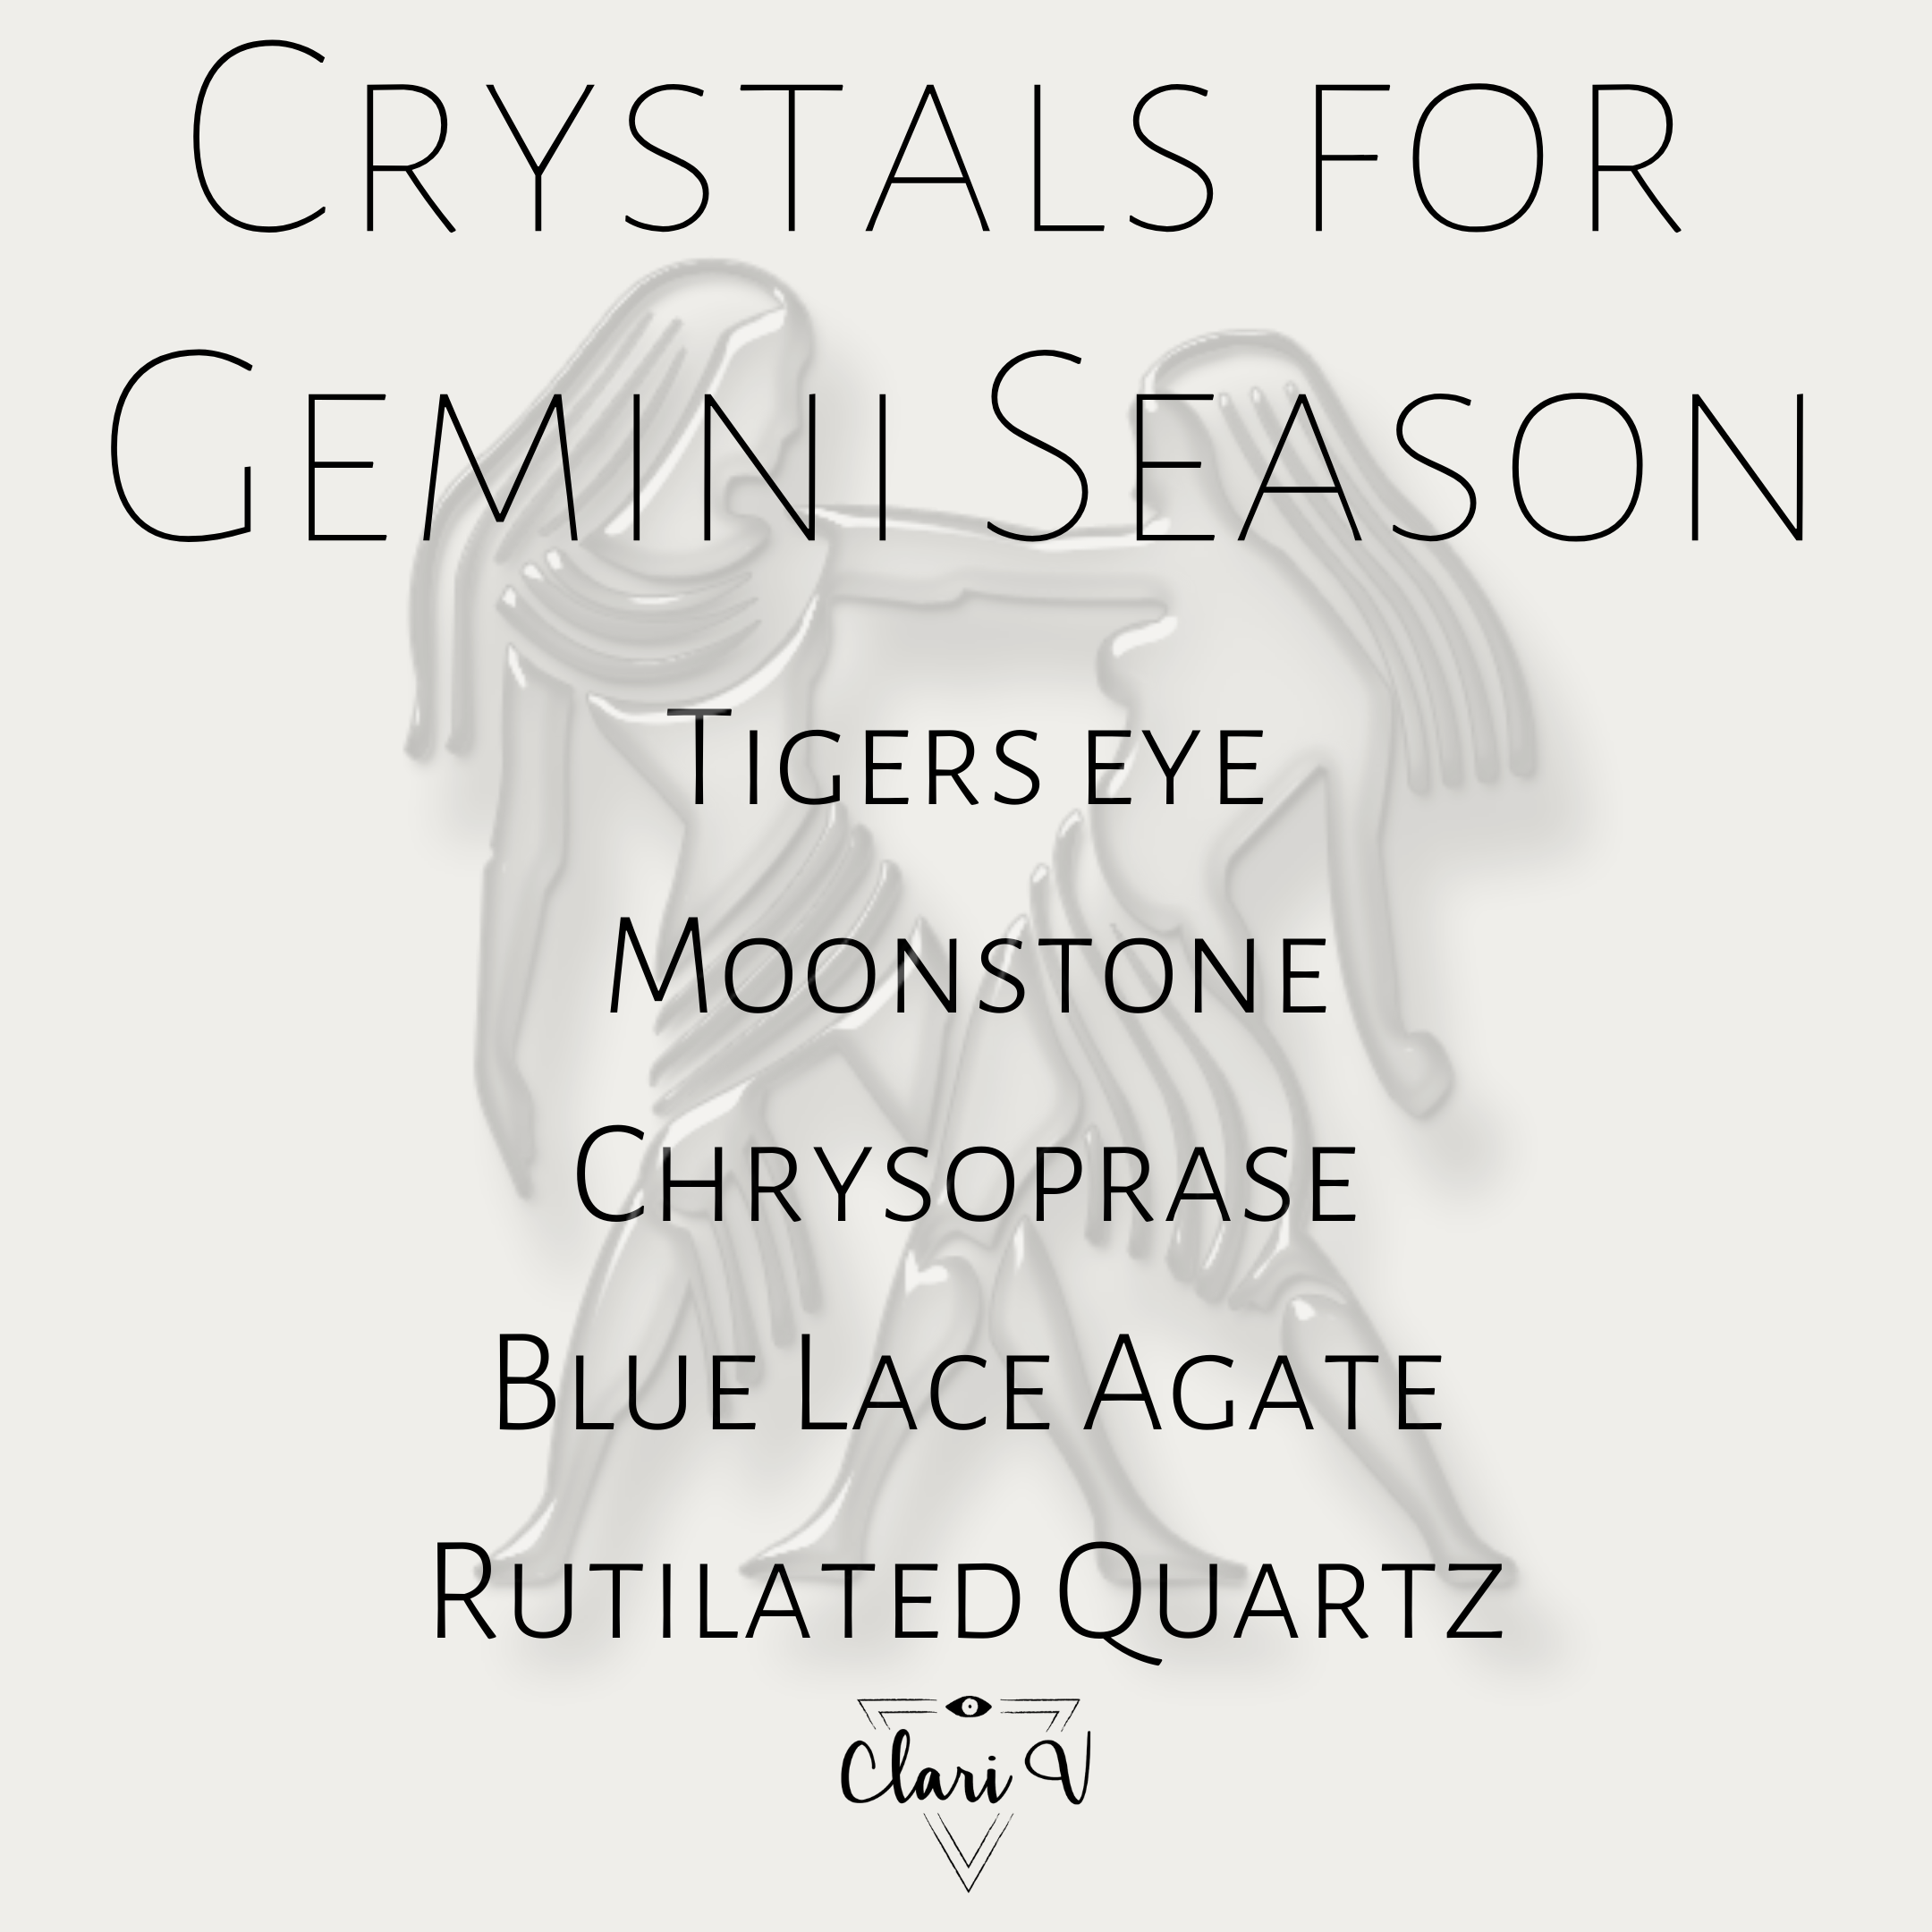 Crystal recommendation for Gemini